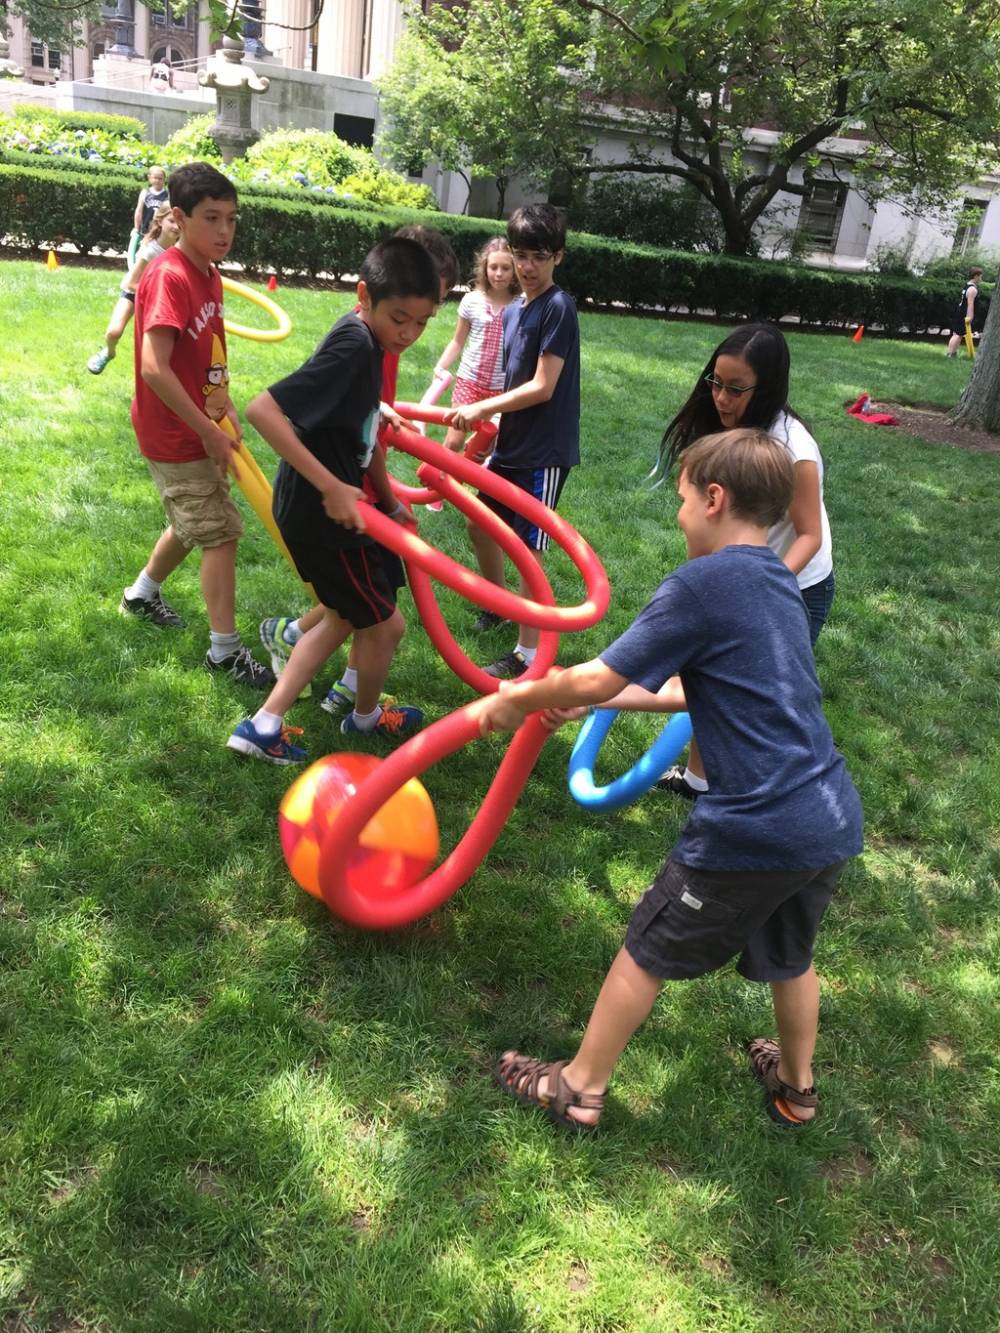 TOP NEW YORK WEIGHT LOSS CAMP: Columbia University - Little Lions Camp is a Top Weight Loss Summer Camp located in New York New York offering many fun and enriching Weight Loss and other camp programs. 